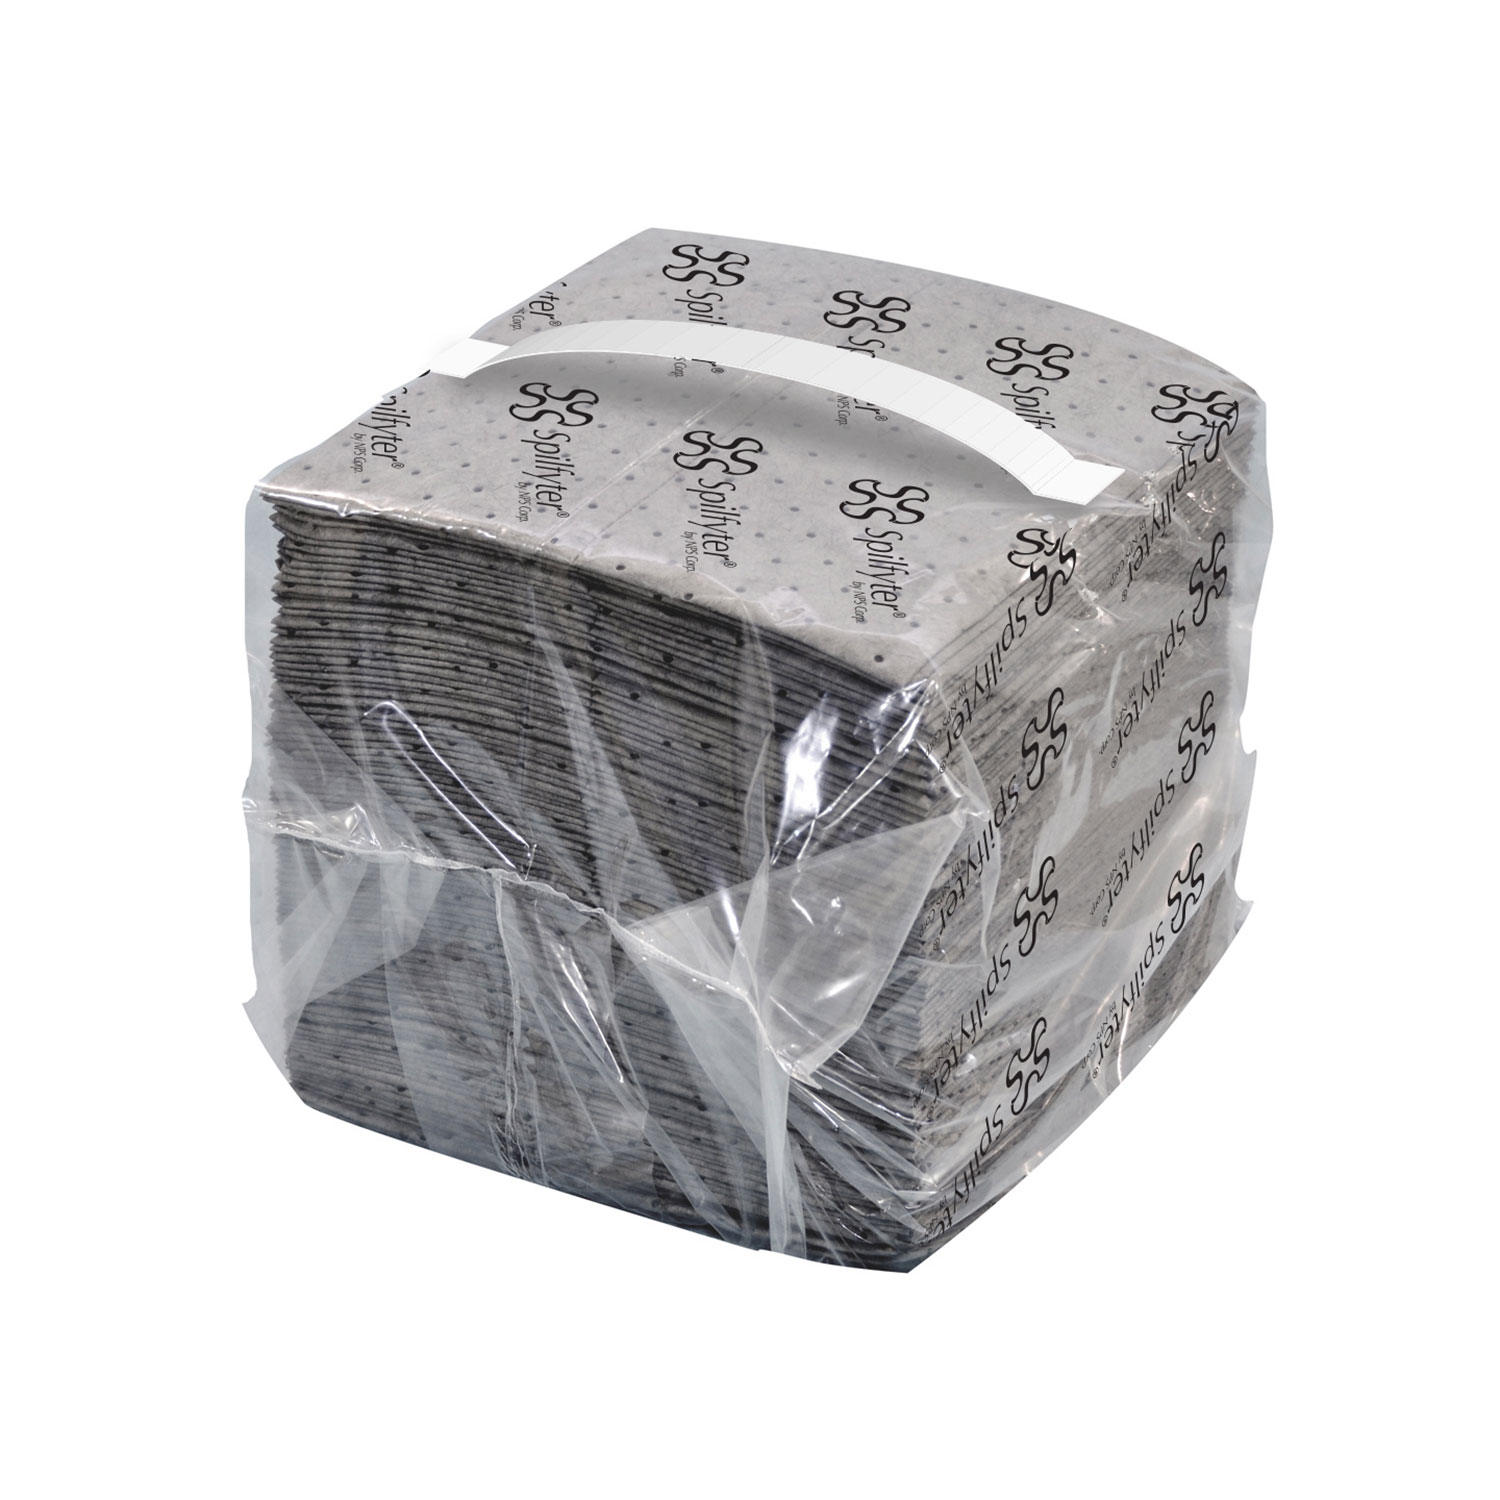 https://www.absorbentsforless.com/images/PO/Spilfyter-16--x-18--Streetfyter-Gray-Universal-LW-Dimpled-Absorbent-Pad-200-Box.jpg